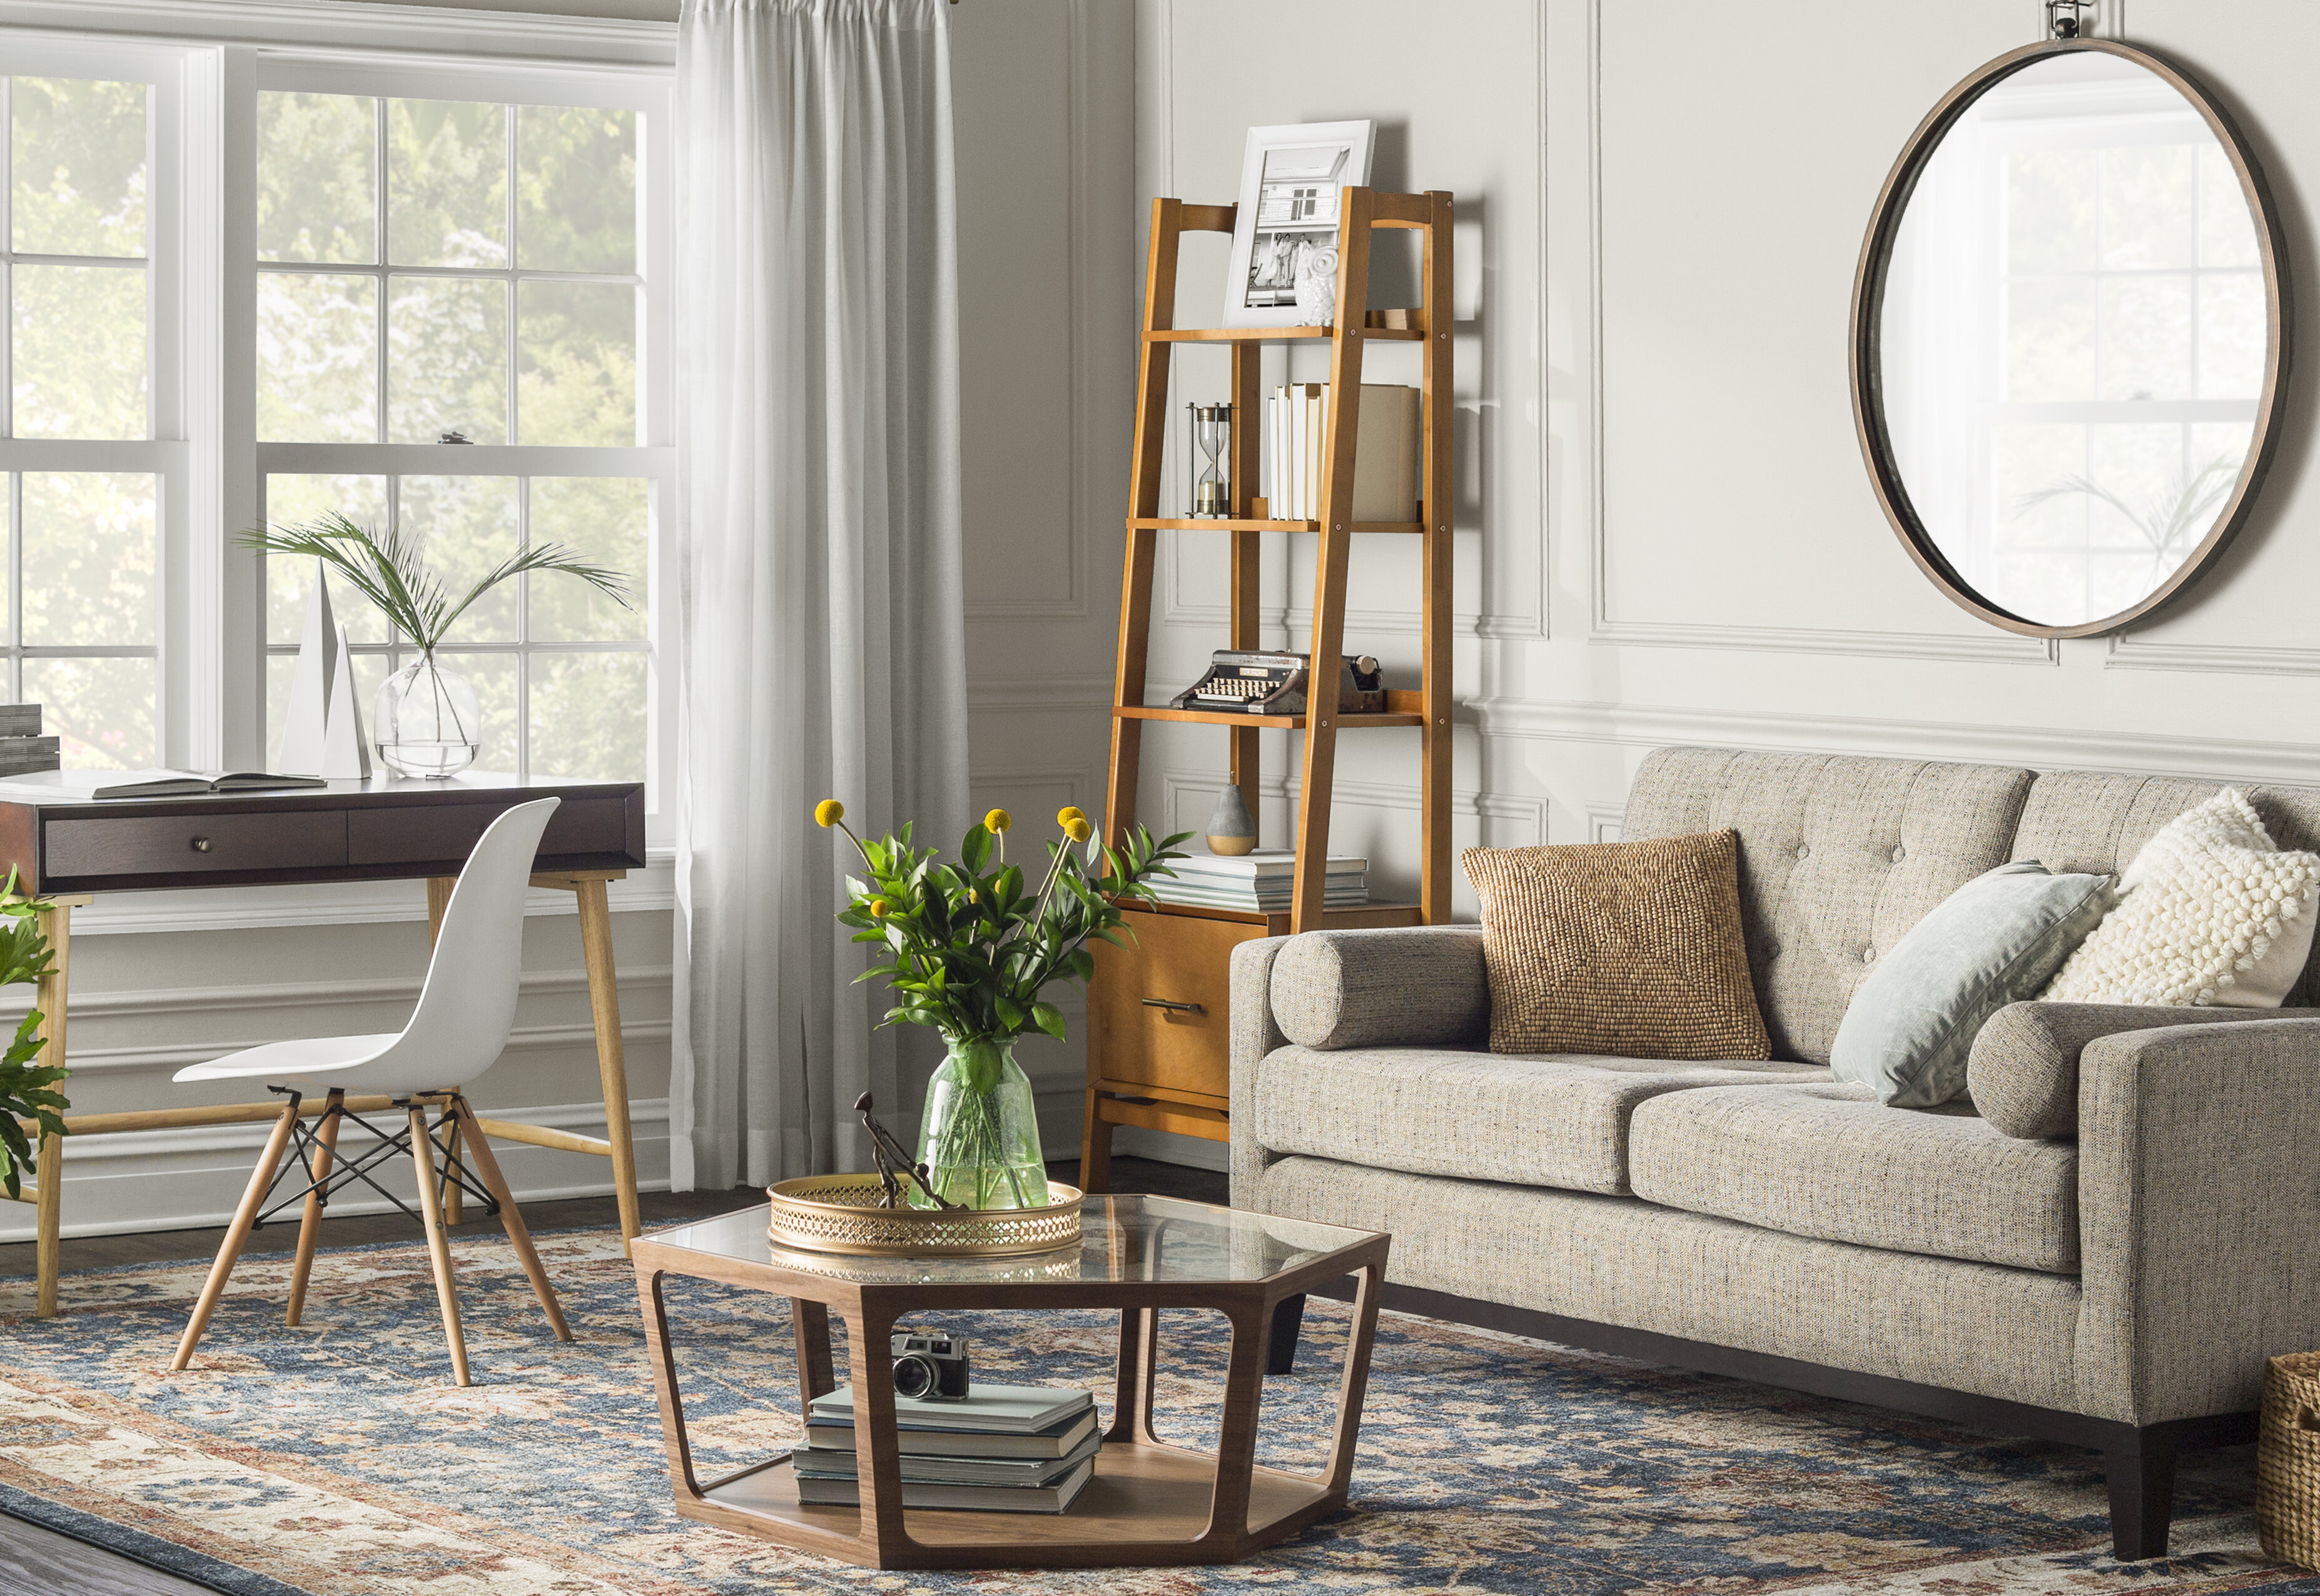 Living room rugs – tips for buying